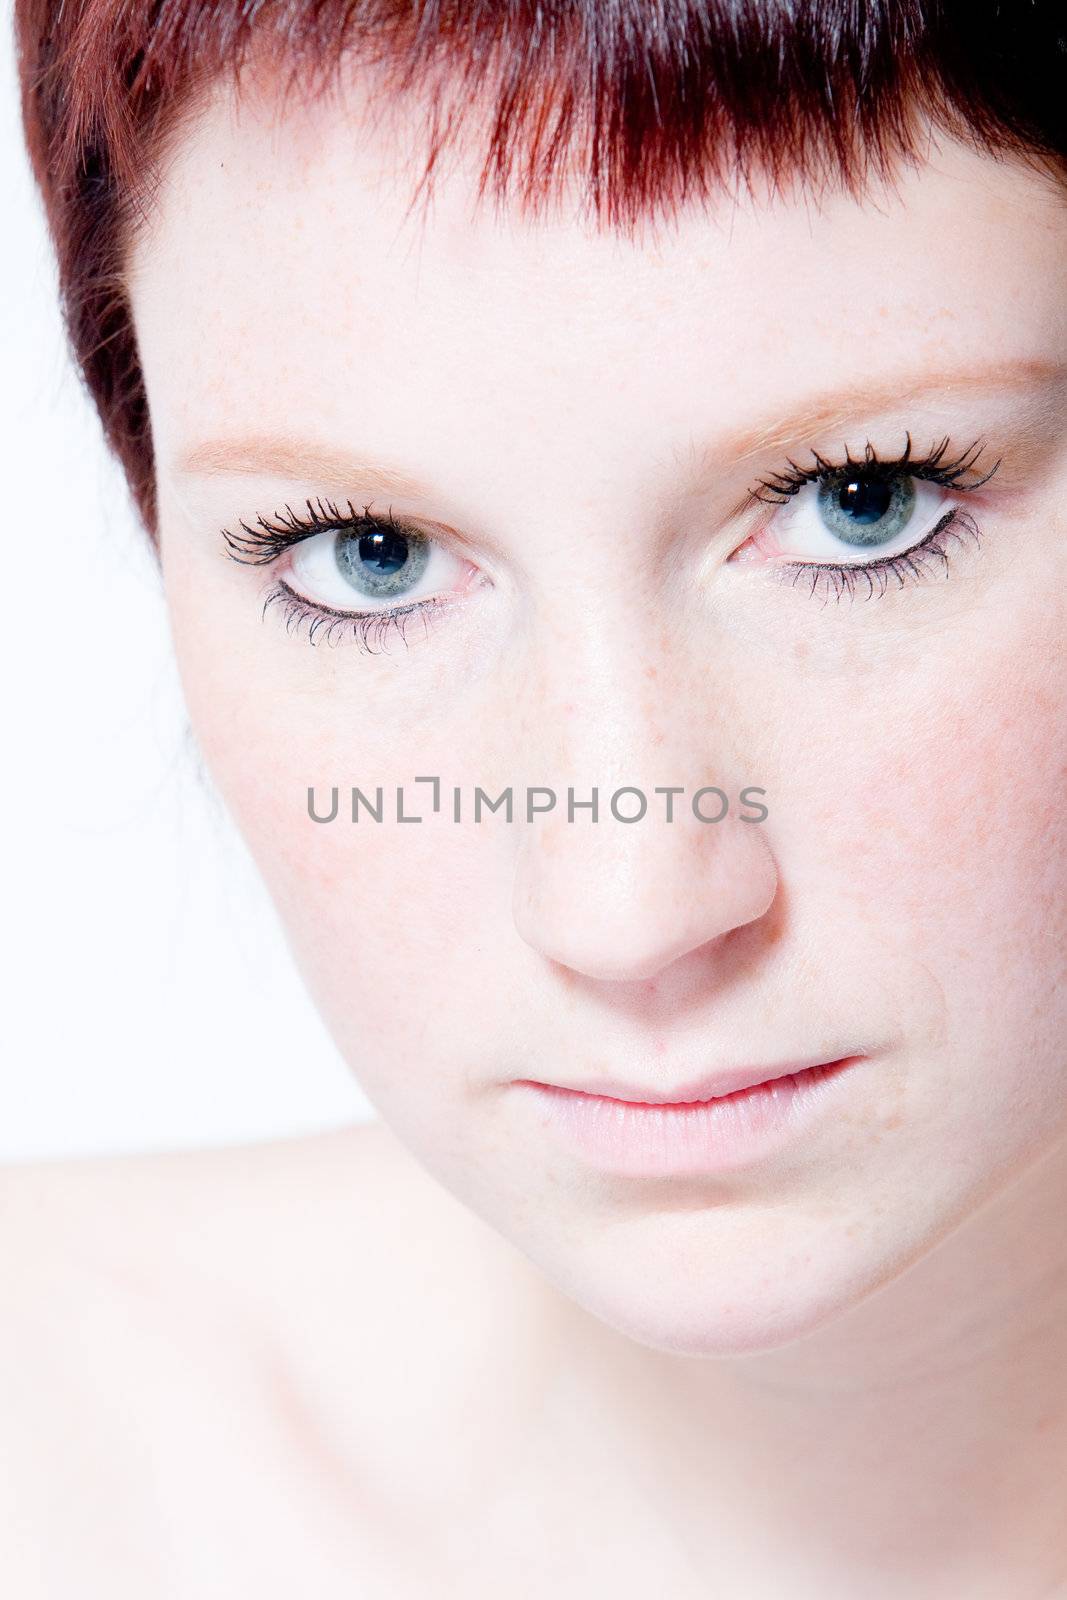 Studio portrait of a young woman with short hair making eye cont by DNFStyle